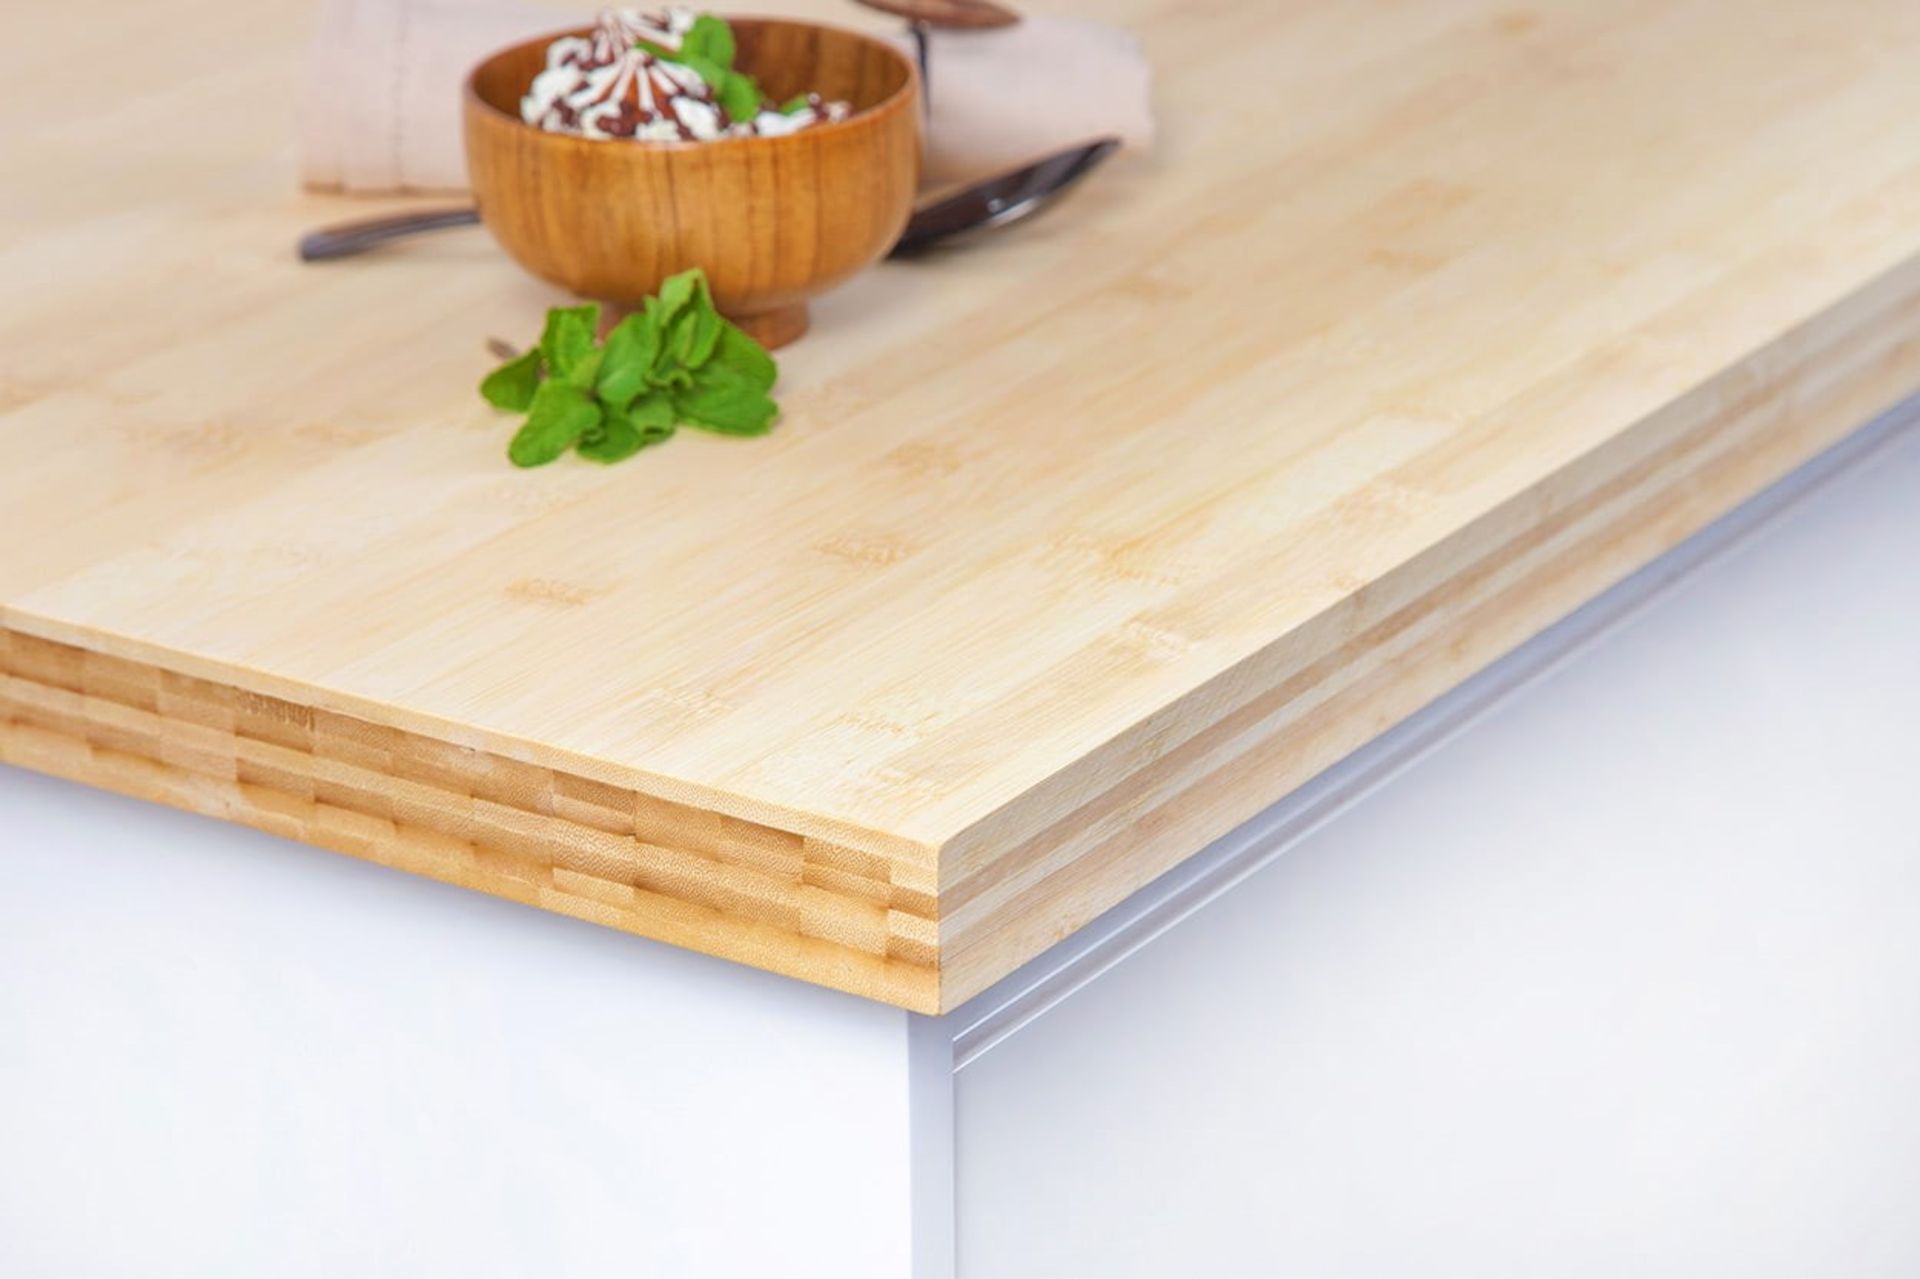 1 x Layered Solid Bamboo Wood Worktop - Size: 3000 x 650 x 40mm - Ideal For Kitchens, Countertops, - Image 3 of 5